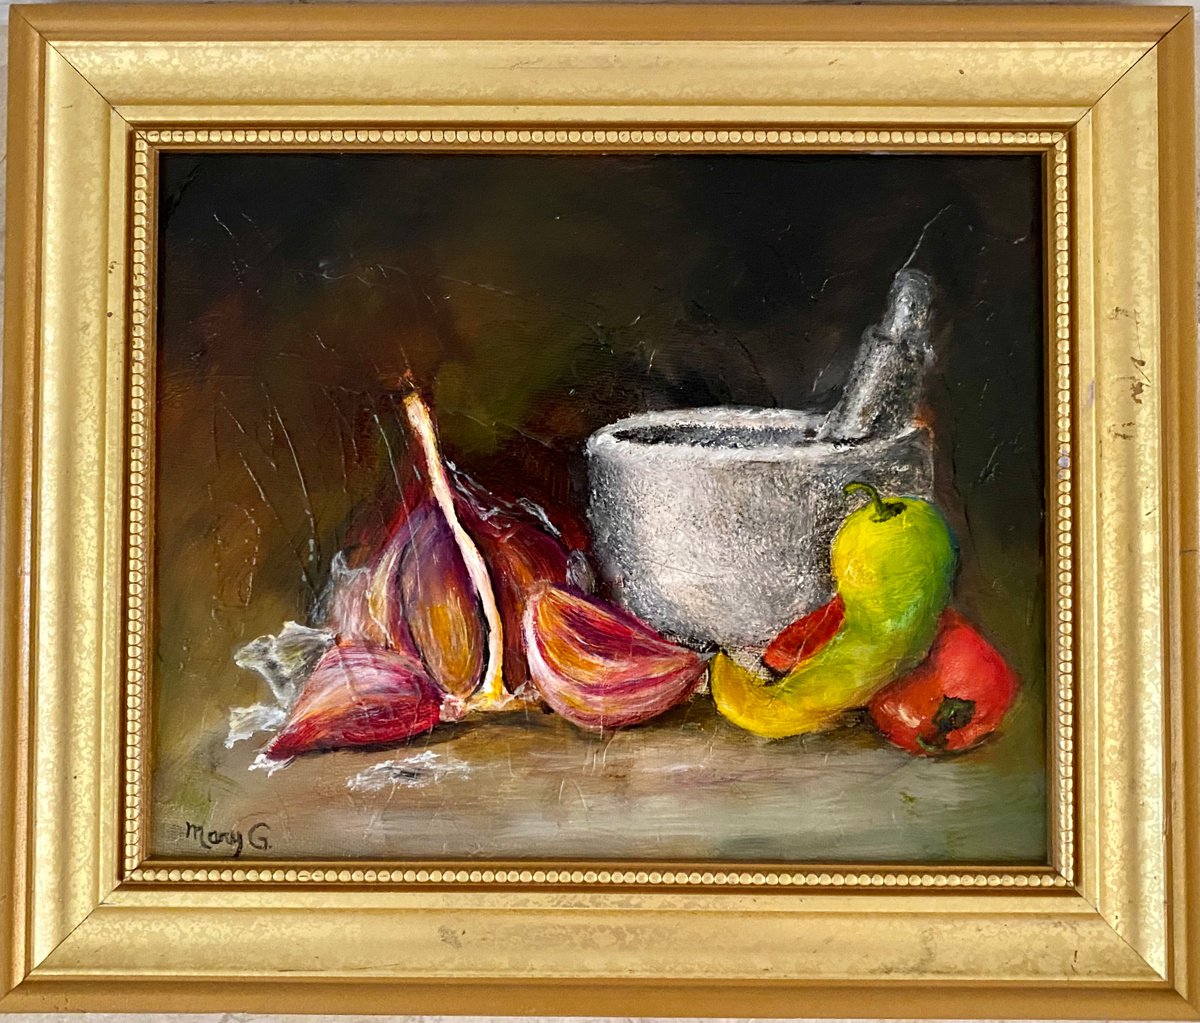 Let’s make guacamole original Oil Painting gold framed 8x10 by Mary Gullette